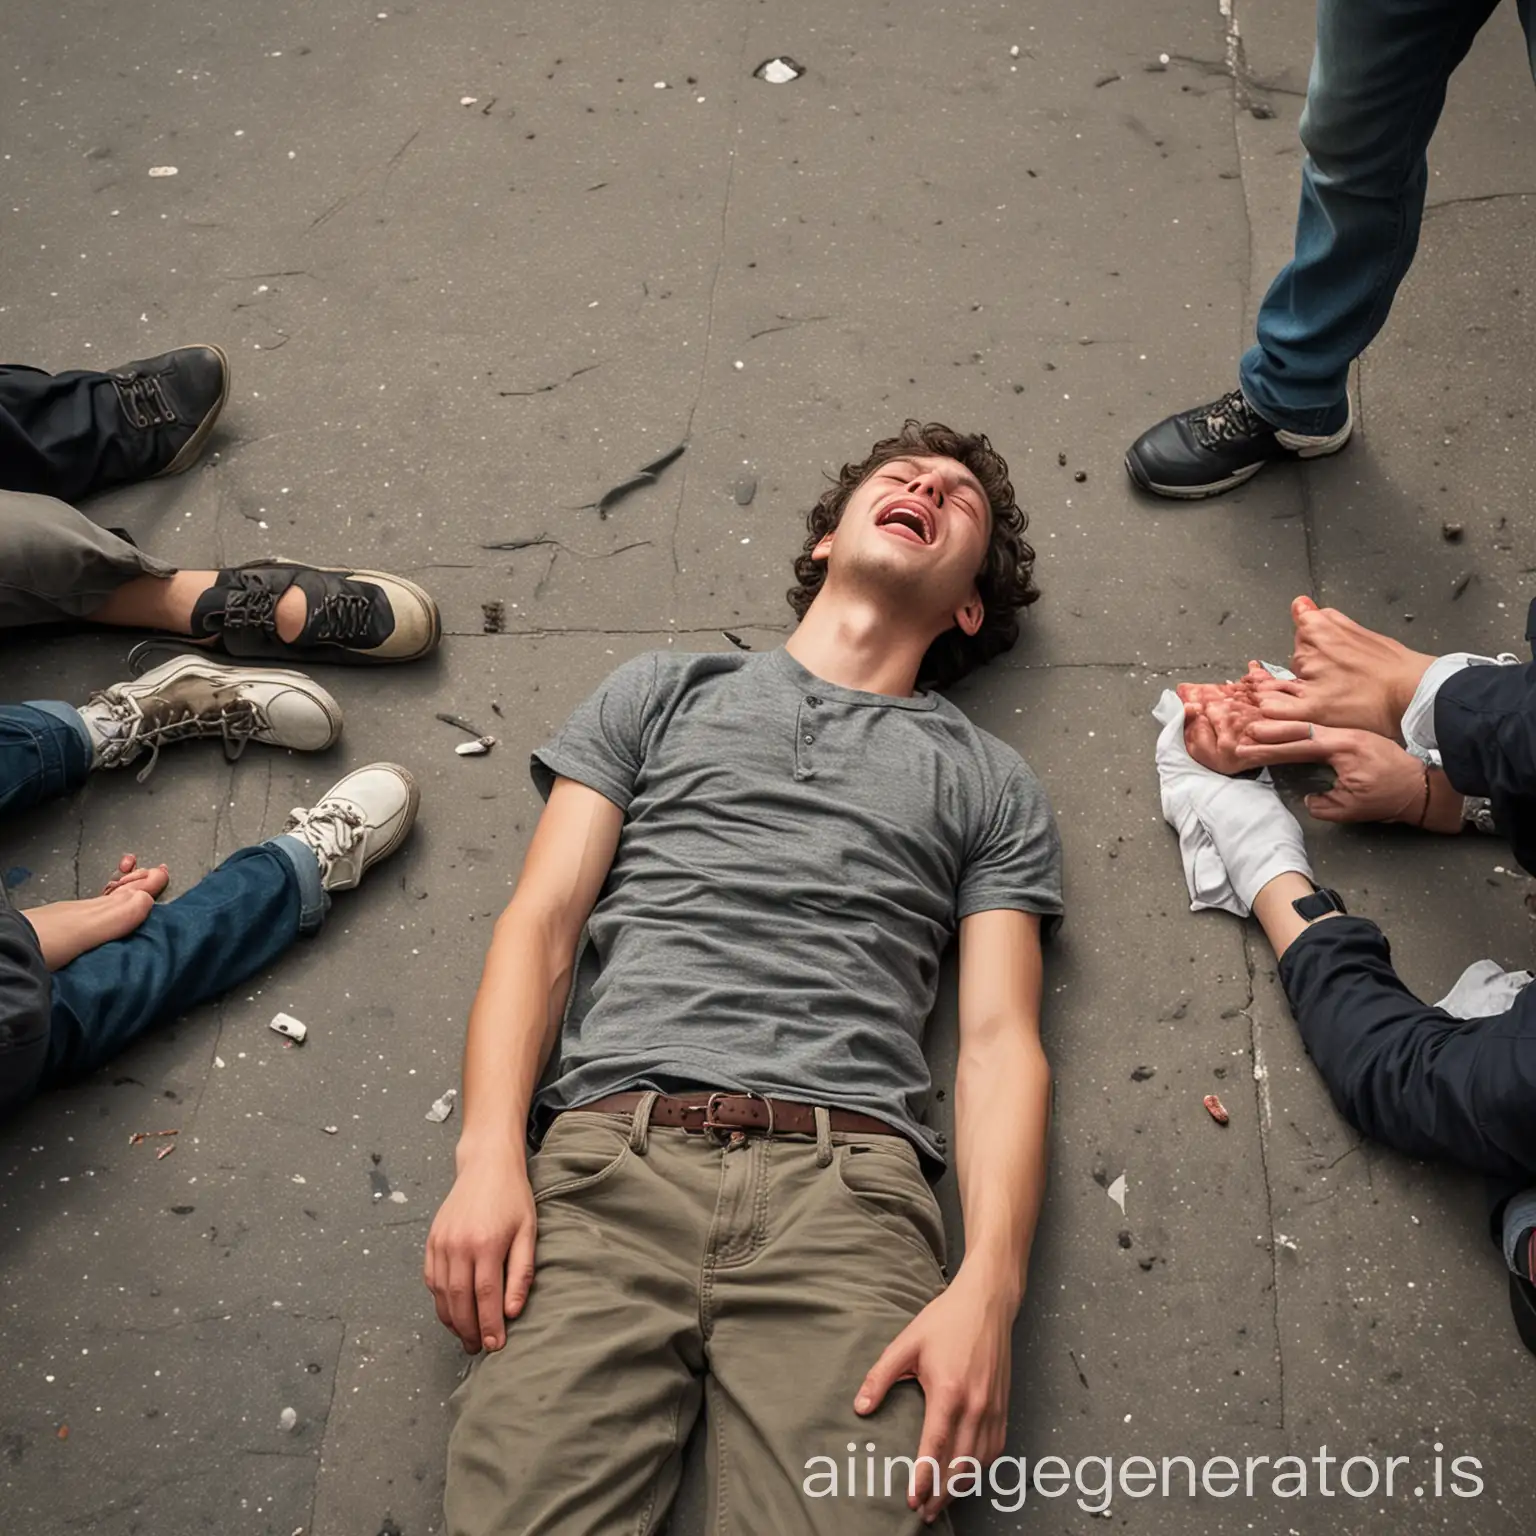 Young-Man-Having-Seizure-Surrounded-by-Astonished-Bystanders